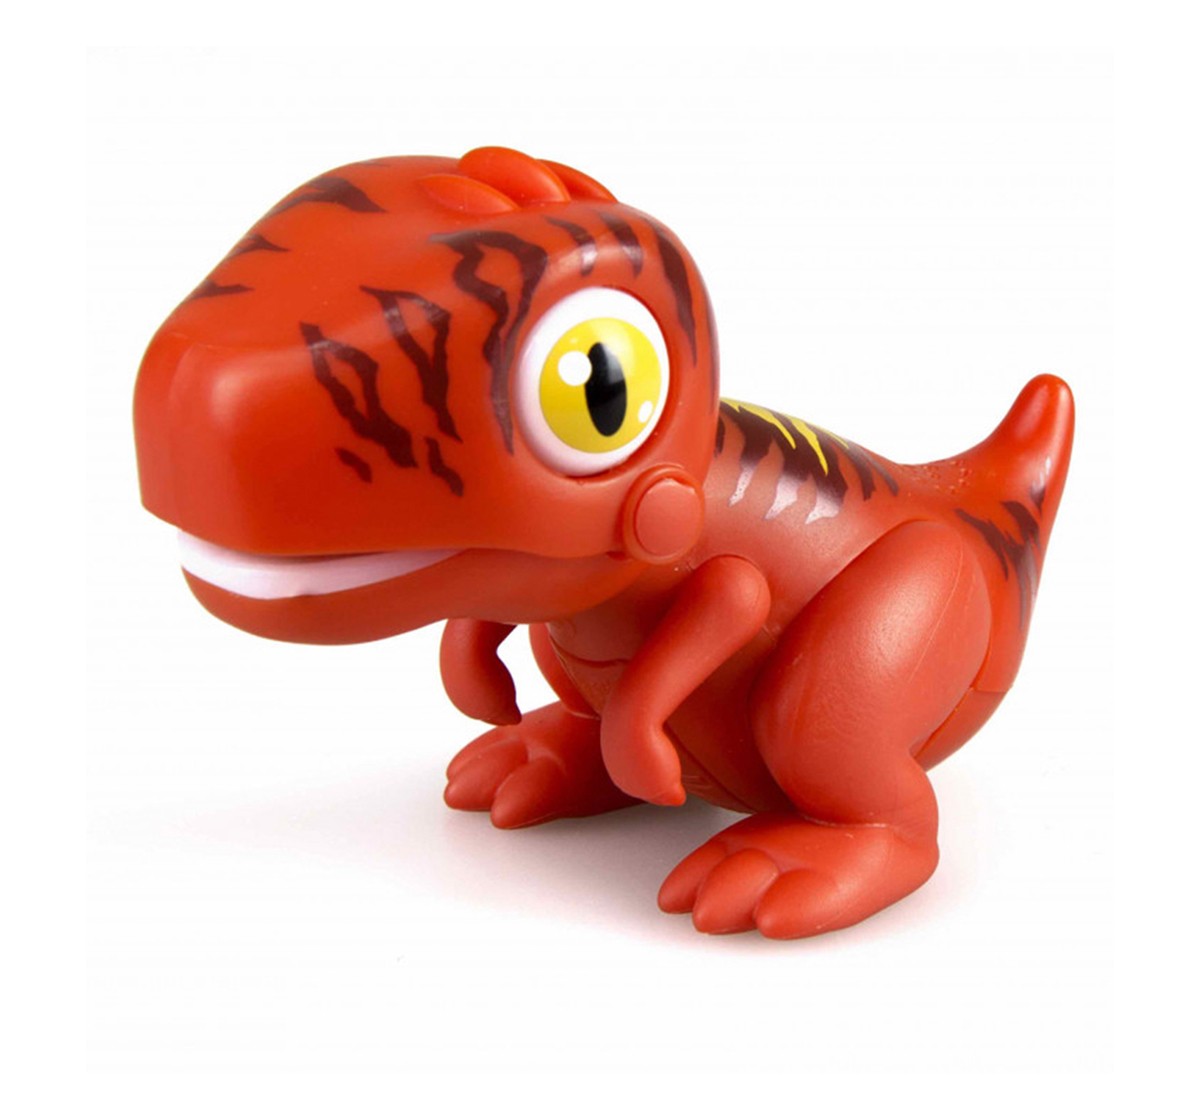 Silverlit YCOO Gloopies Dino can snap up tiny metals with its tongues and bring you “tongues” of surprises Ready To Play Available In 3 Multi Colours Robotics for Kids age 3Y+ 